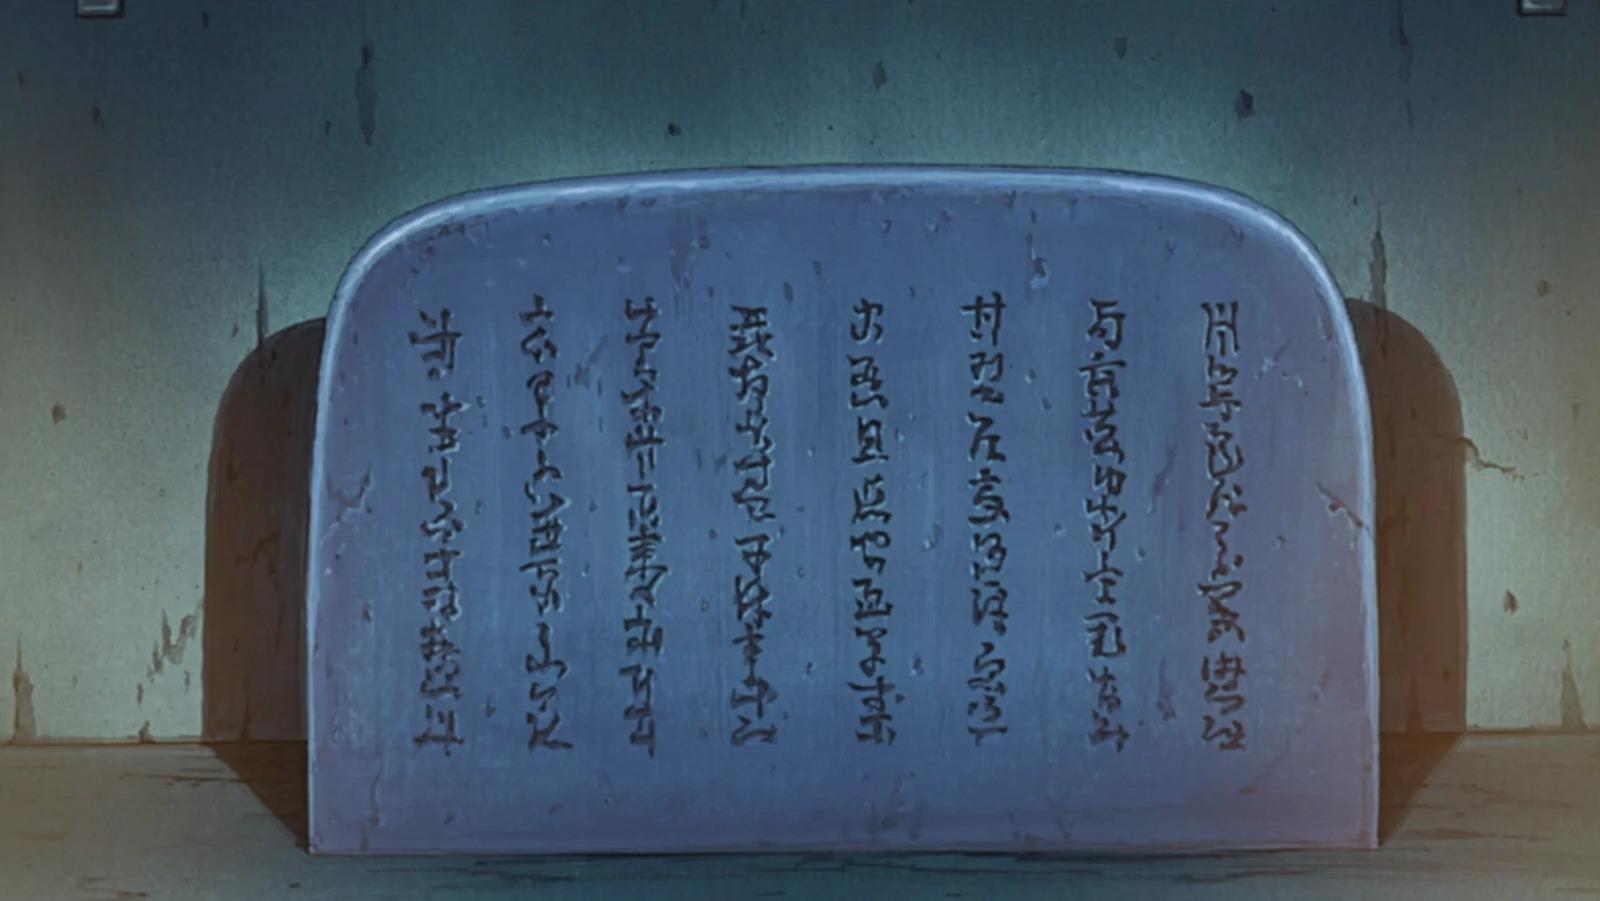 An image featuring the stone tablet of the Uchiha Clan in Naruto